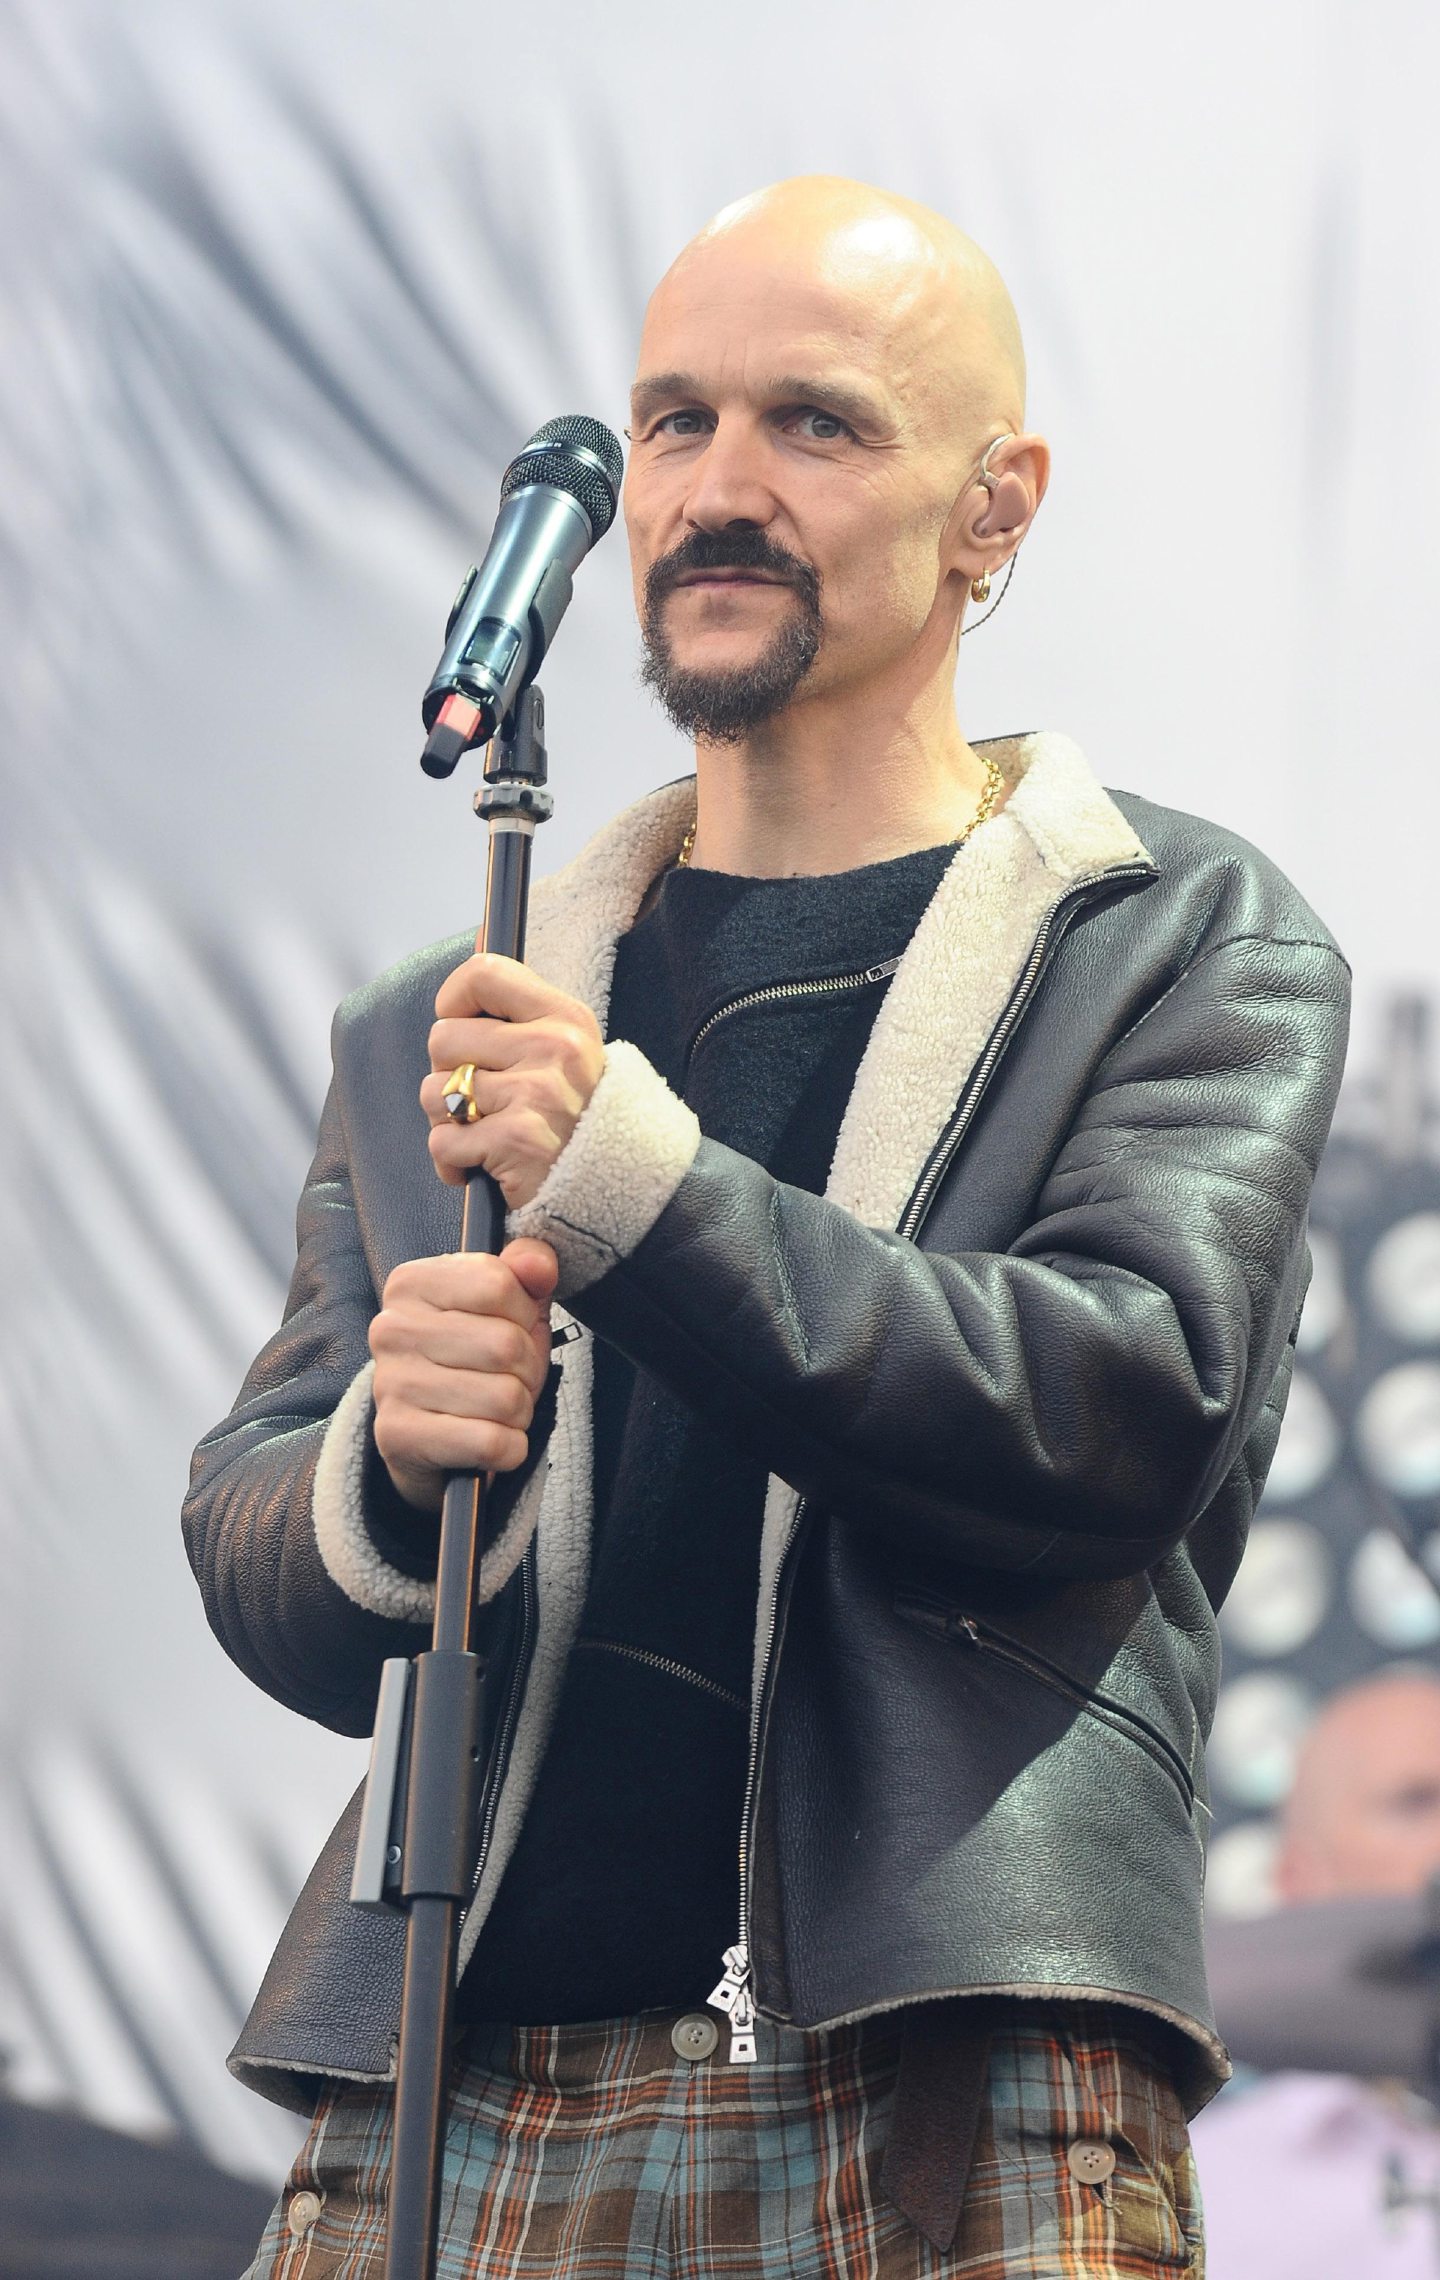 Tim Booth from the band James on stage